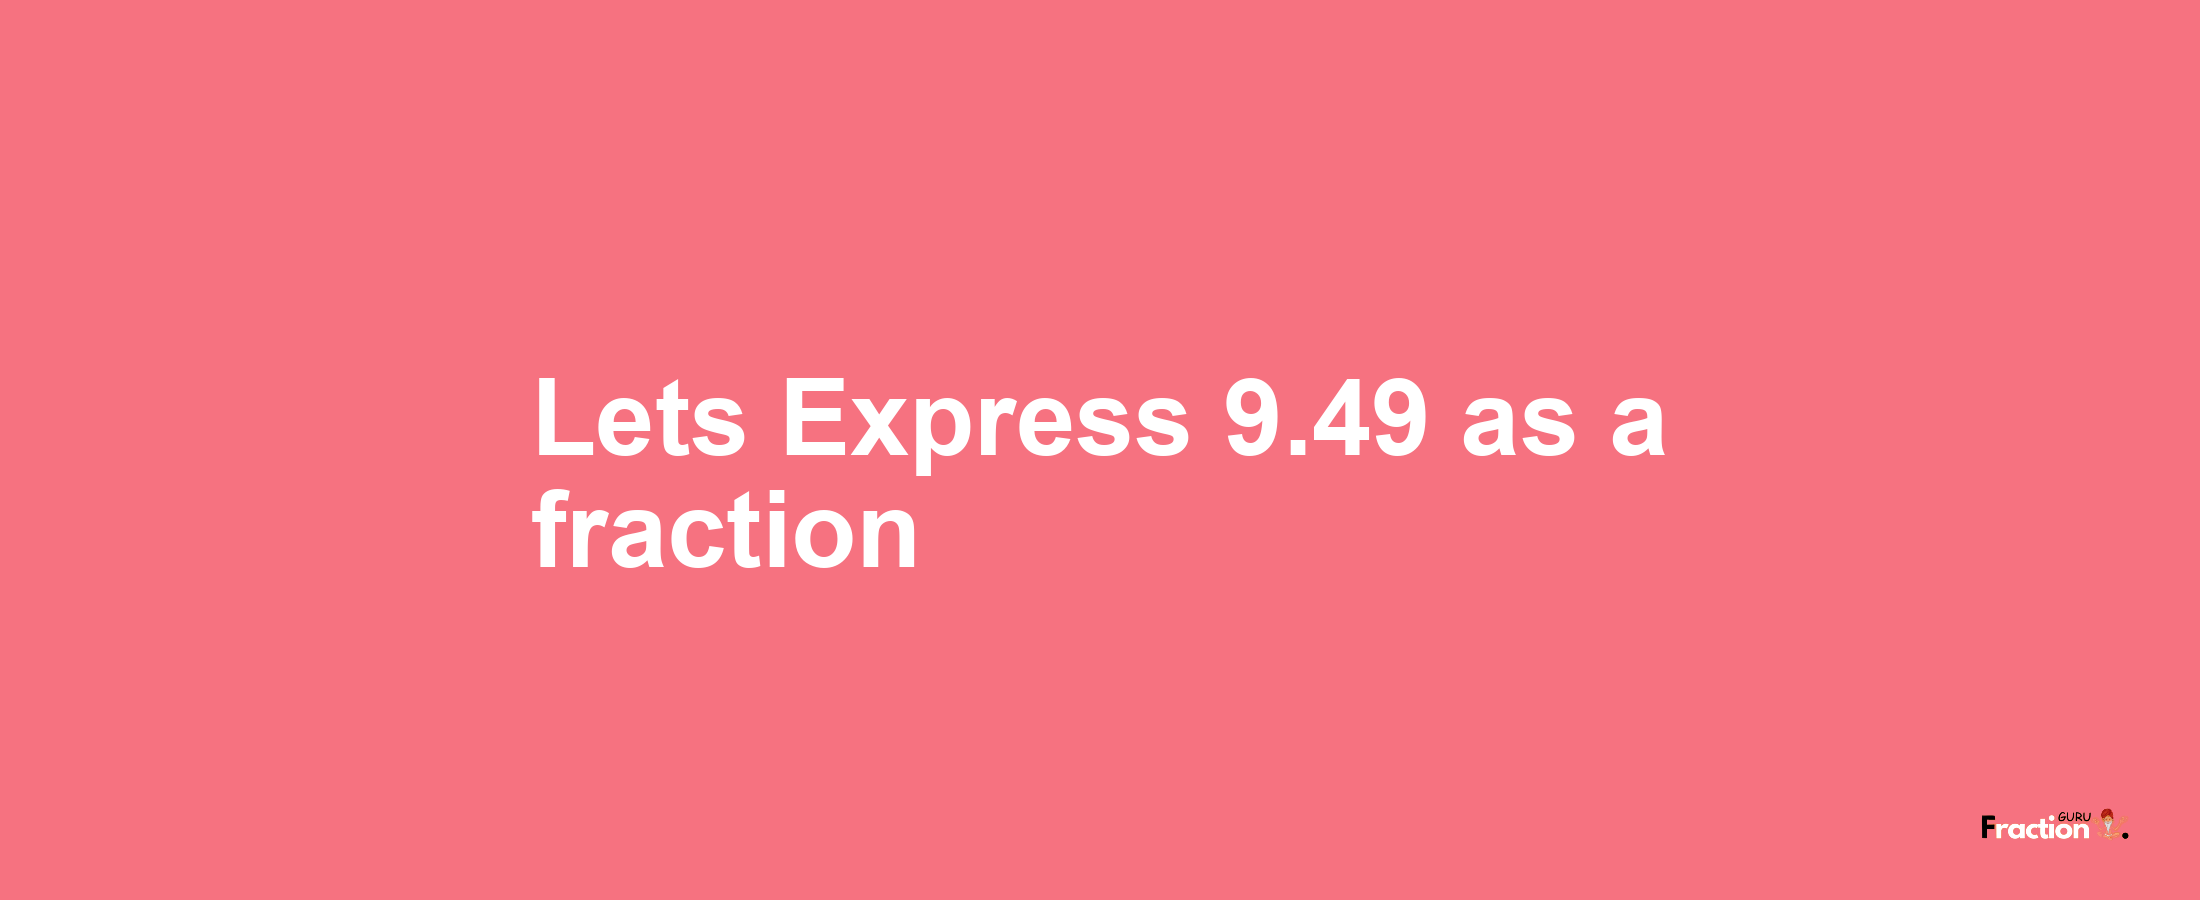 Lets Express 9.49 as afraction